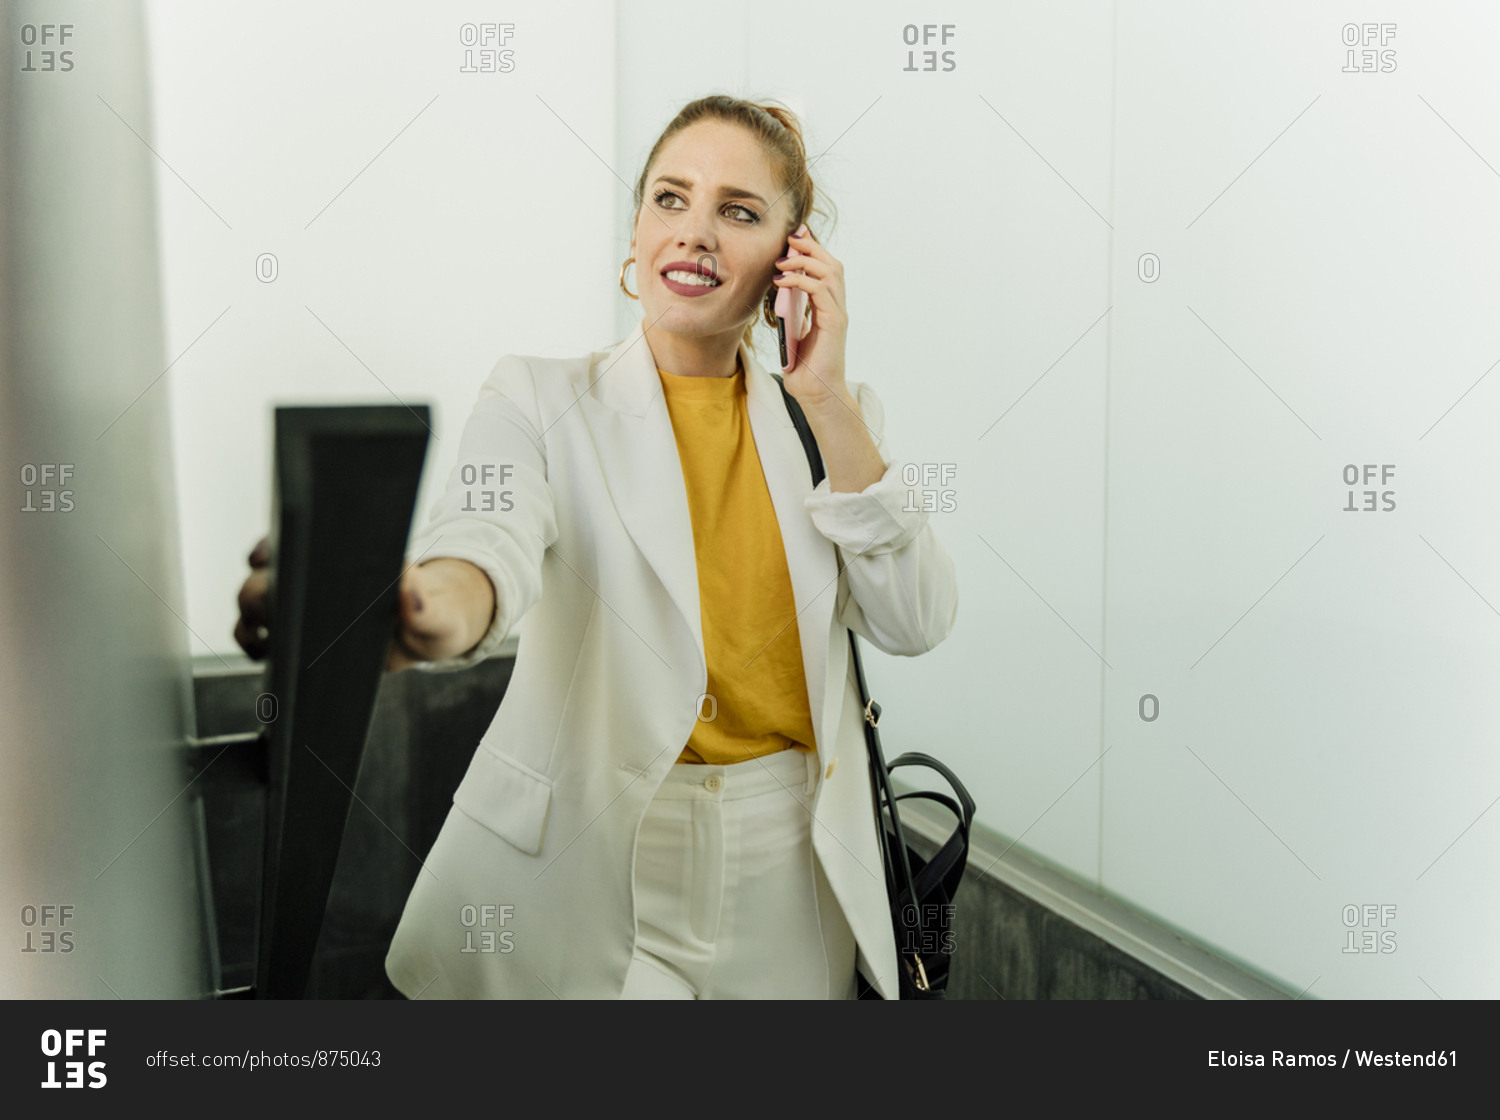 Businesswoman in white pant suit- ascending stairs- using smartphone